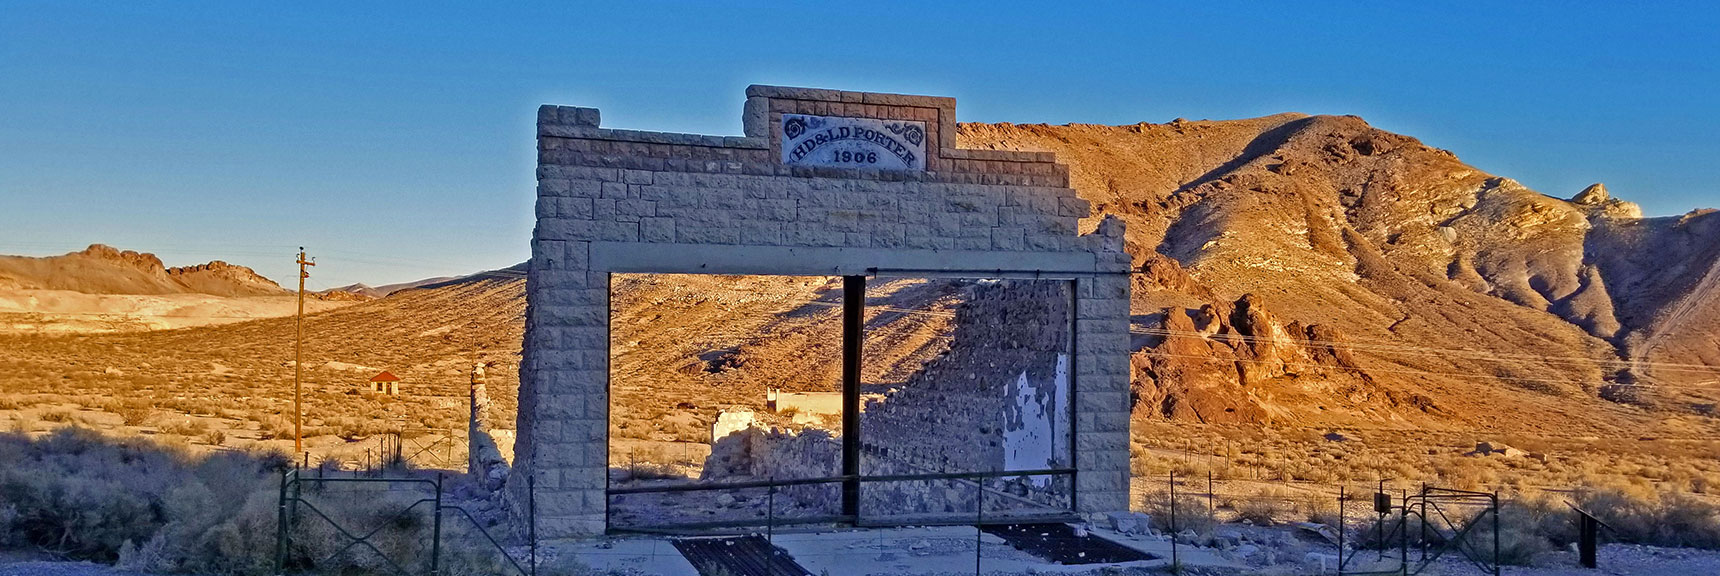 H.D. and L.D. Porter General Store | Rhyolite Ghost Town | Death Valley Area, Nevada